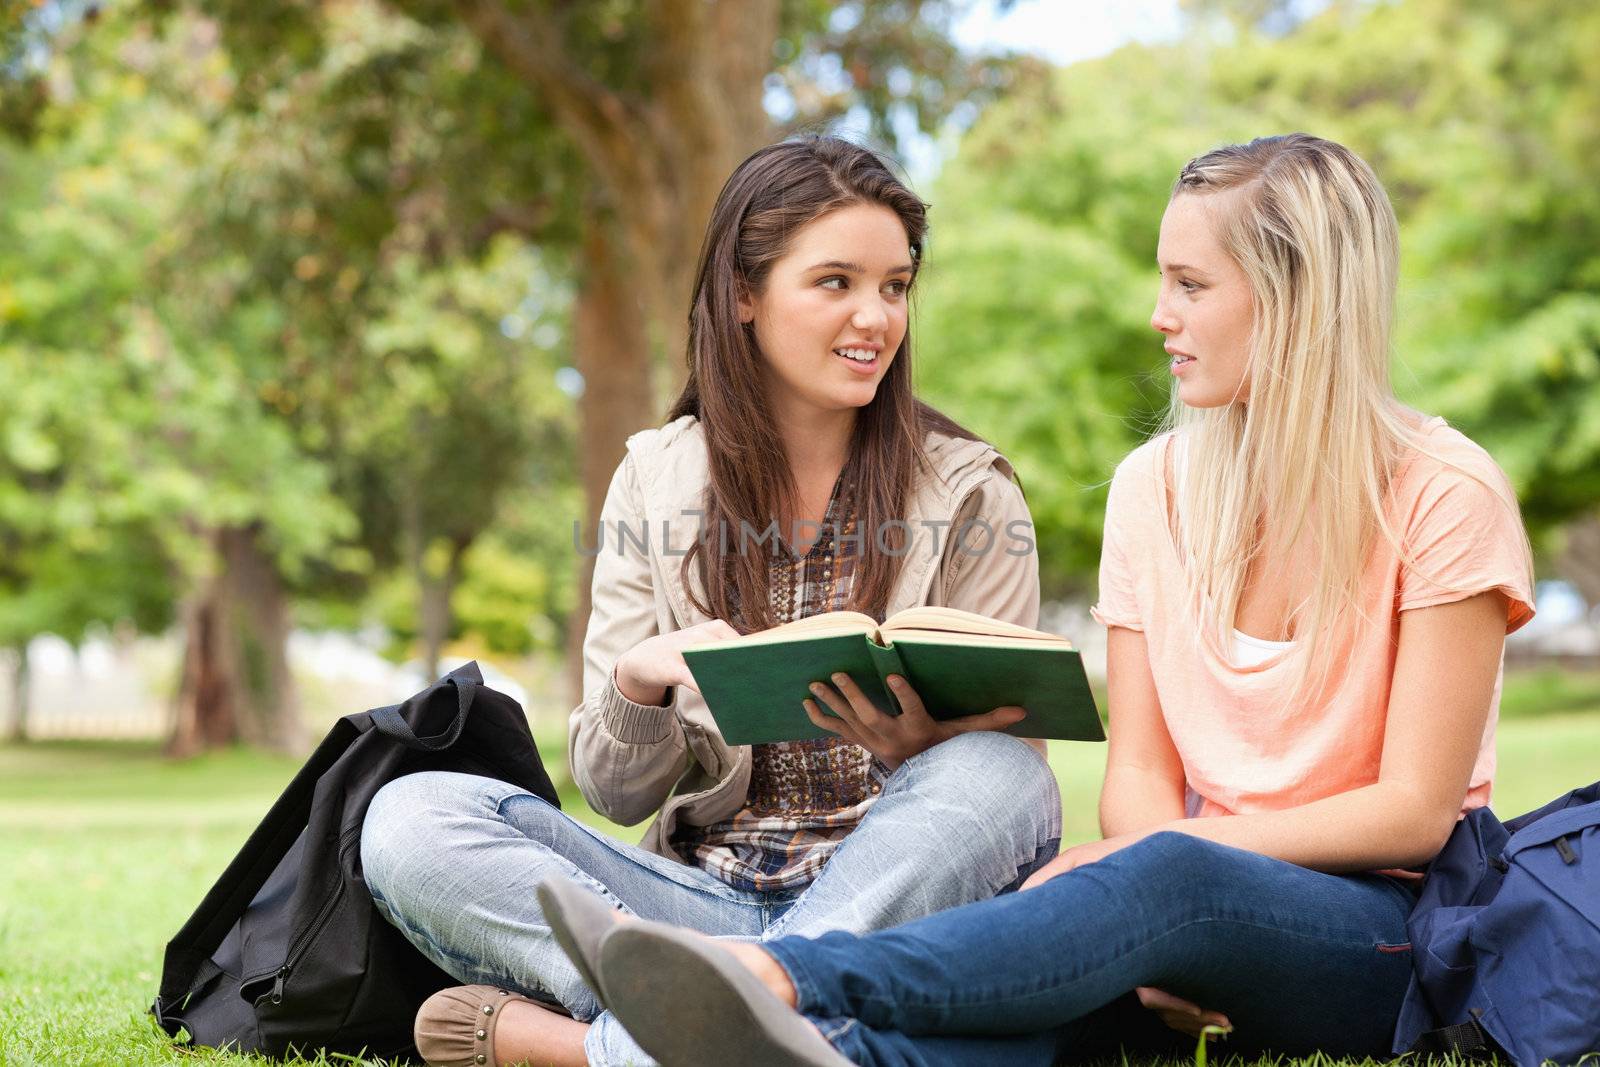 Female teenagers sitting while studying with a textbook in a park